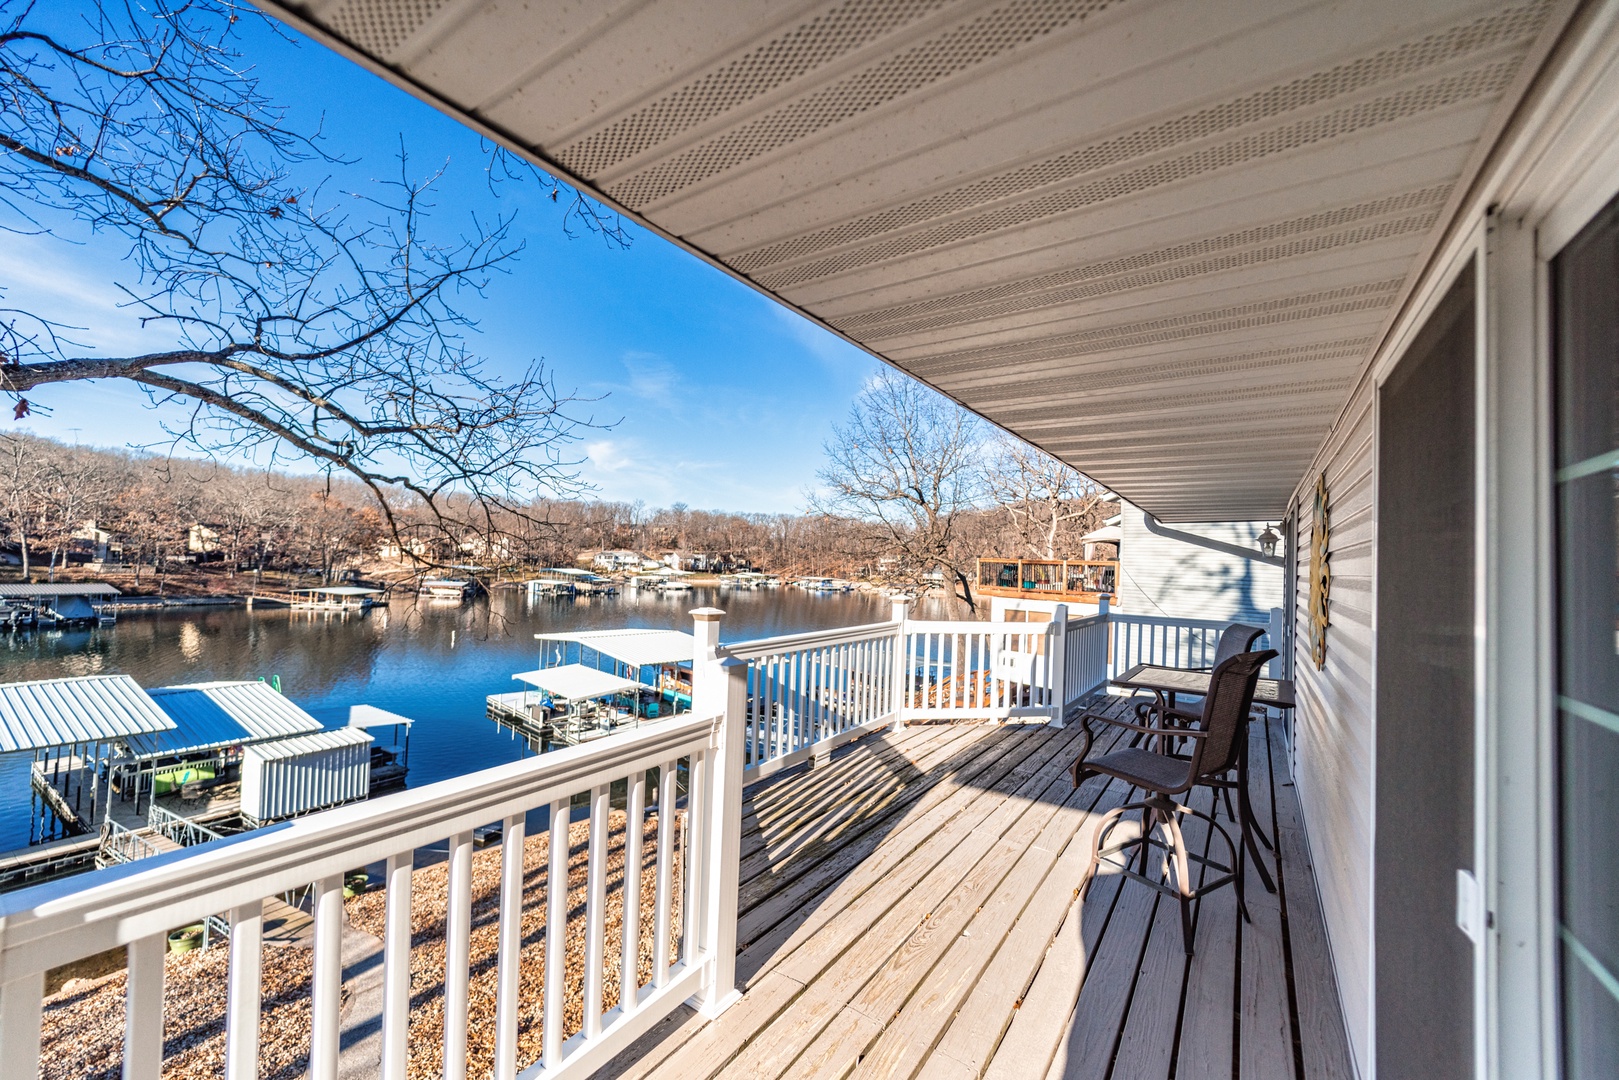 Step out onto the upper-level deck & relax in the fresh air